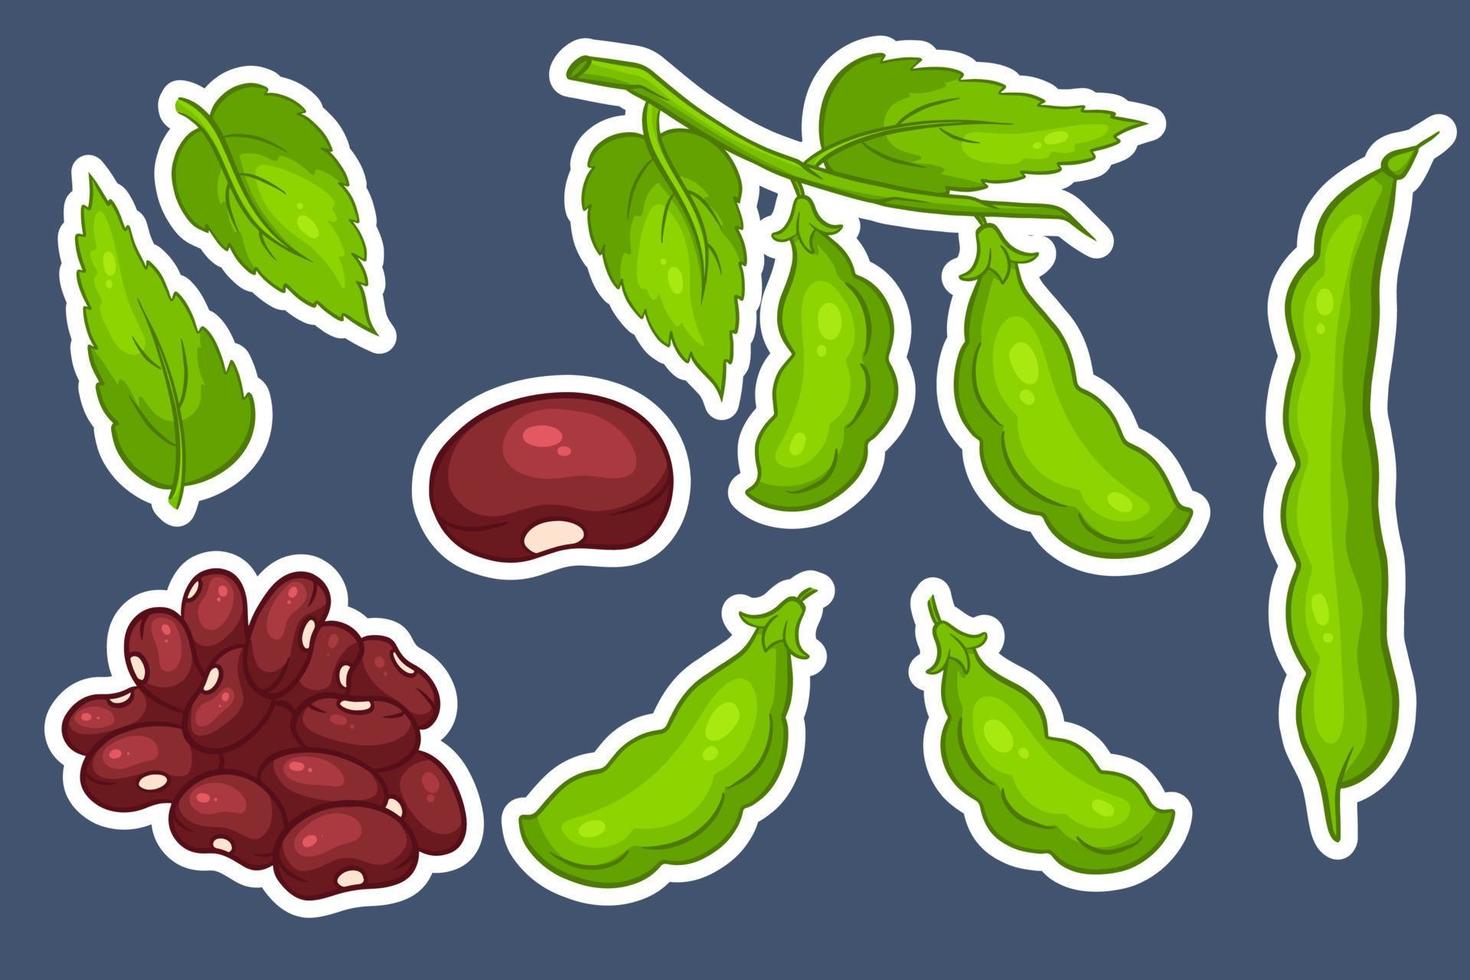 Beans set. Fresh green beans and red beans. vector